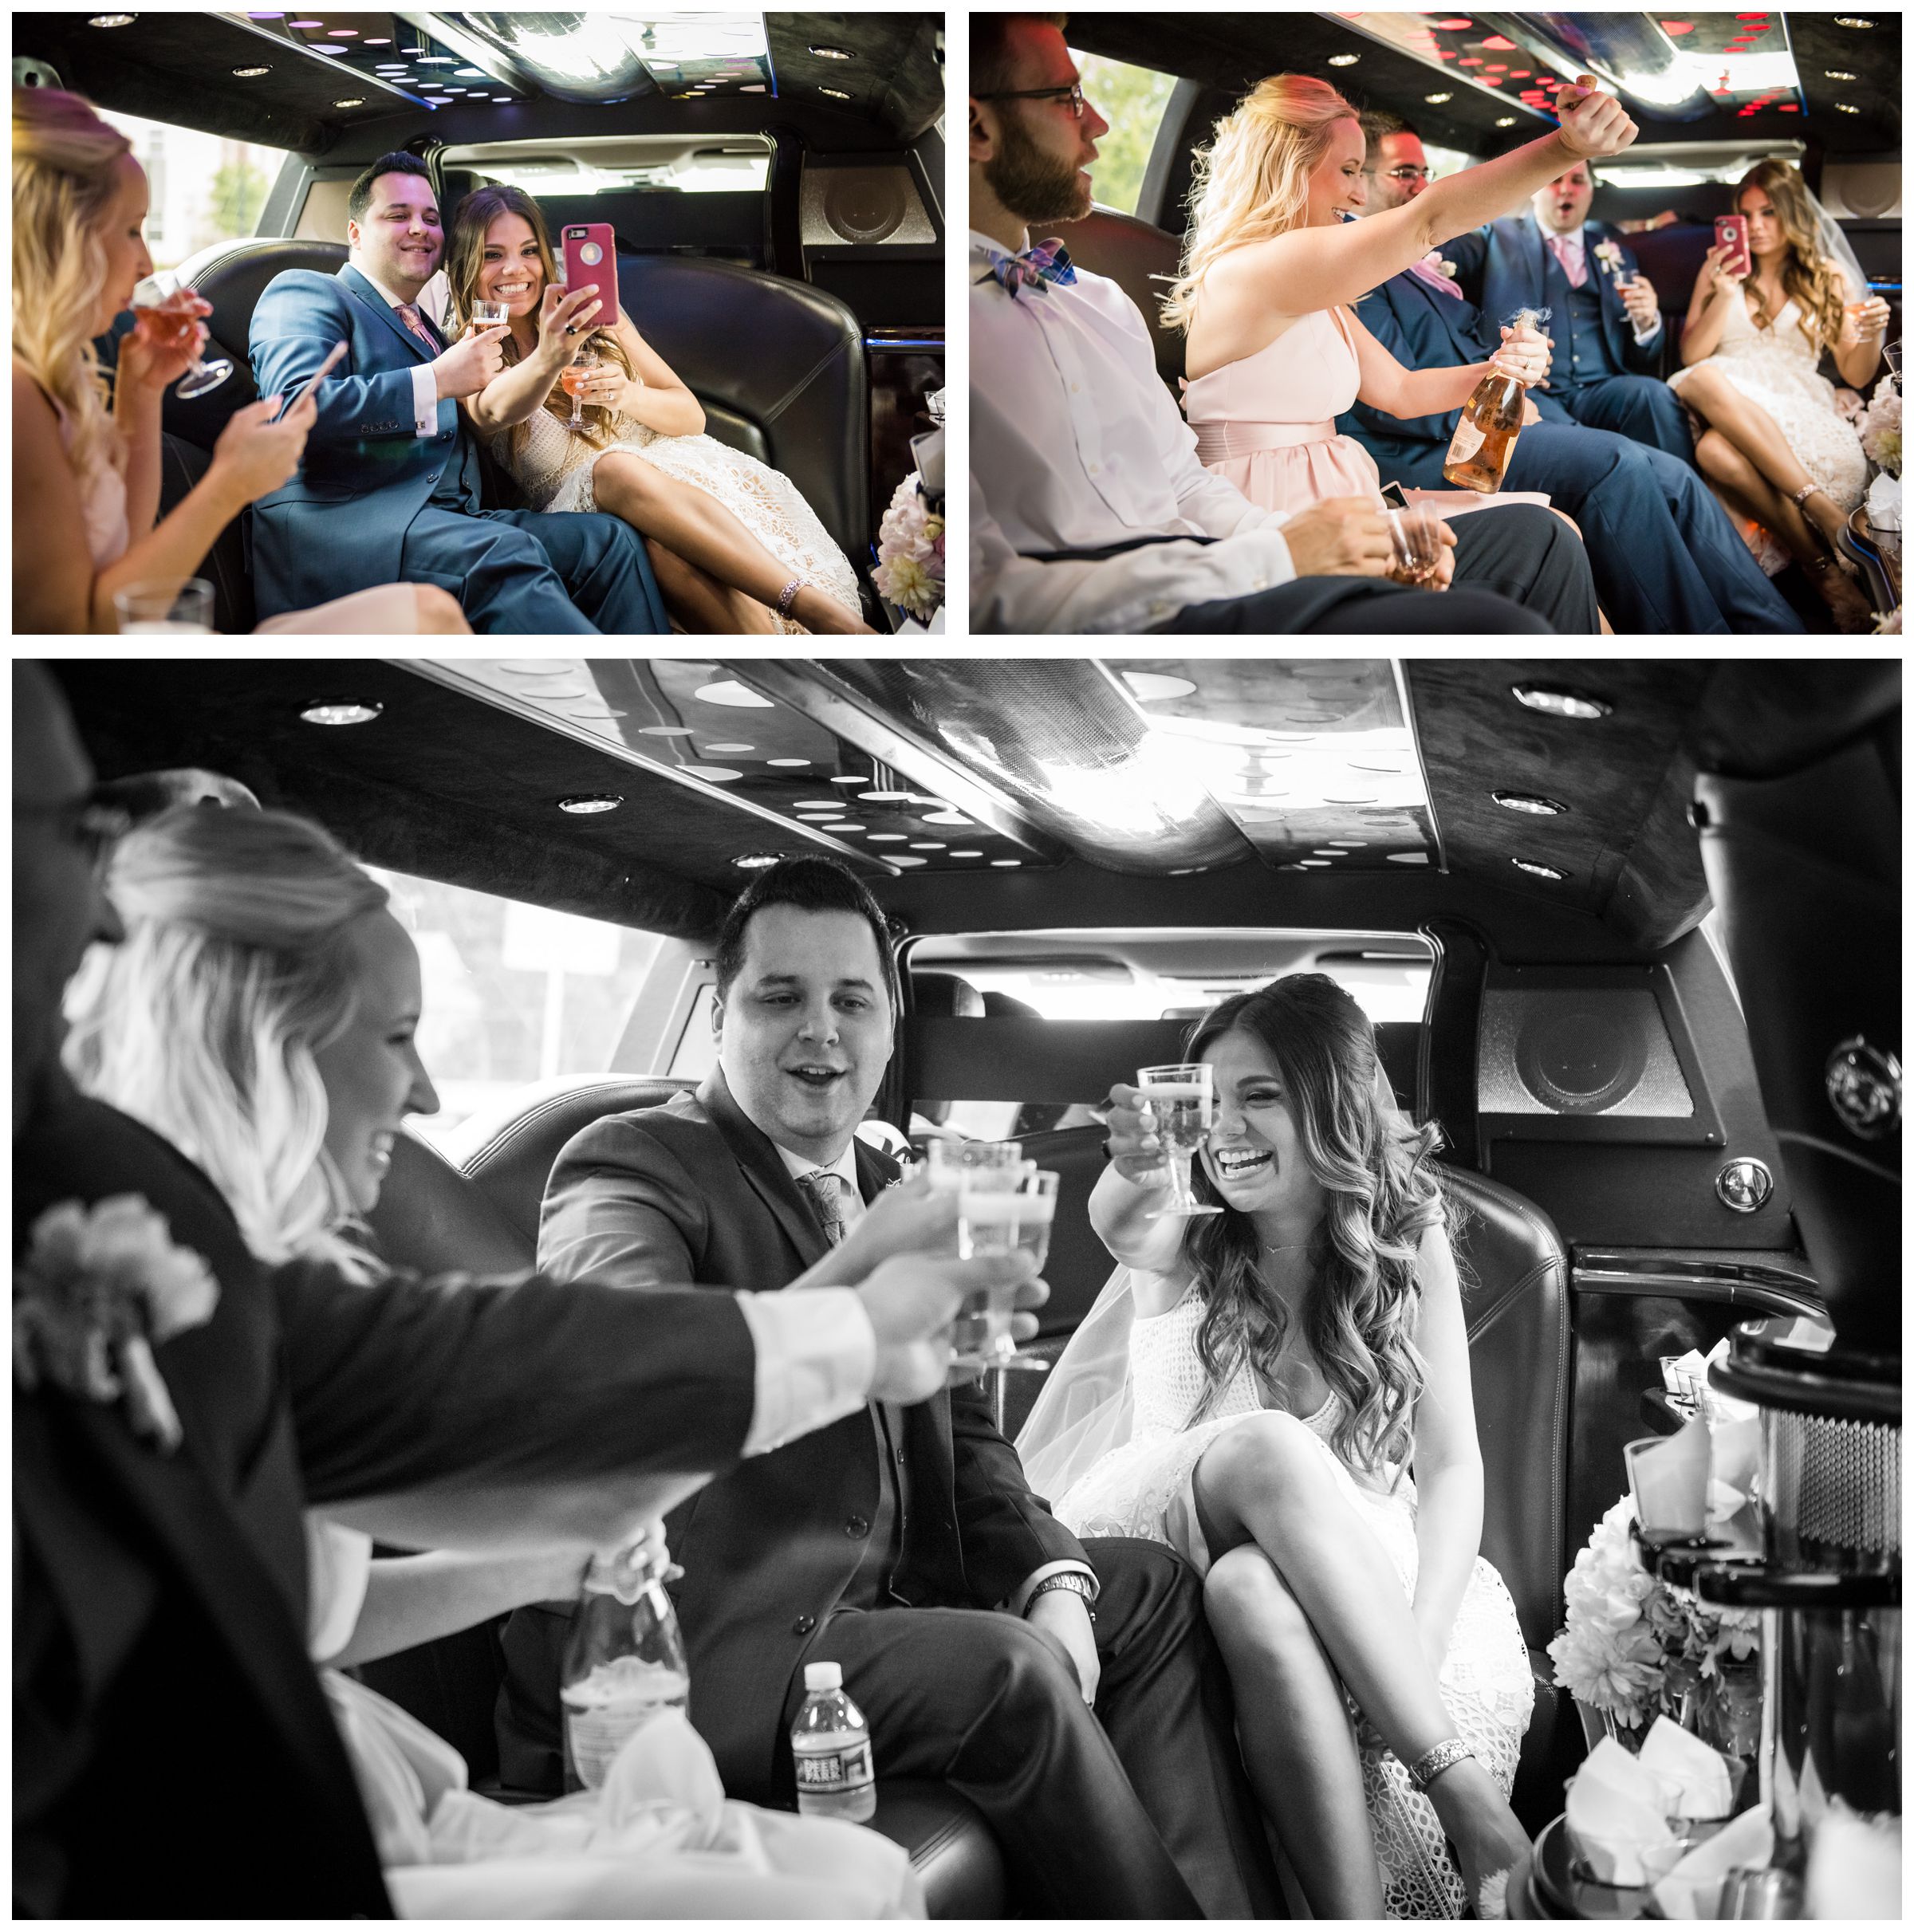 bridal party celebrating in limo in downtown Washington, D.C. after wedding